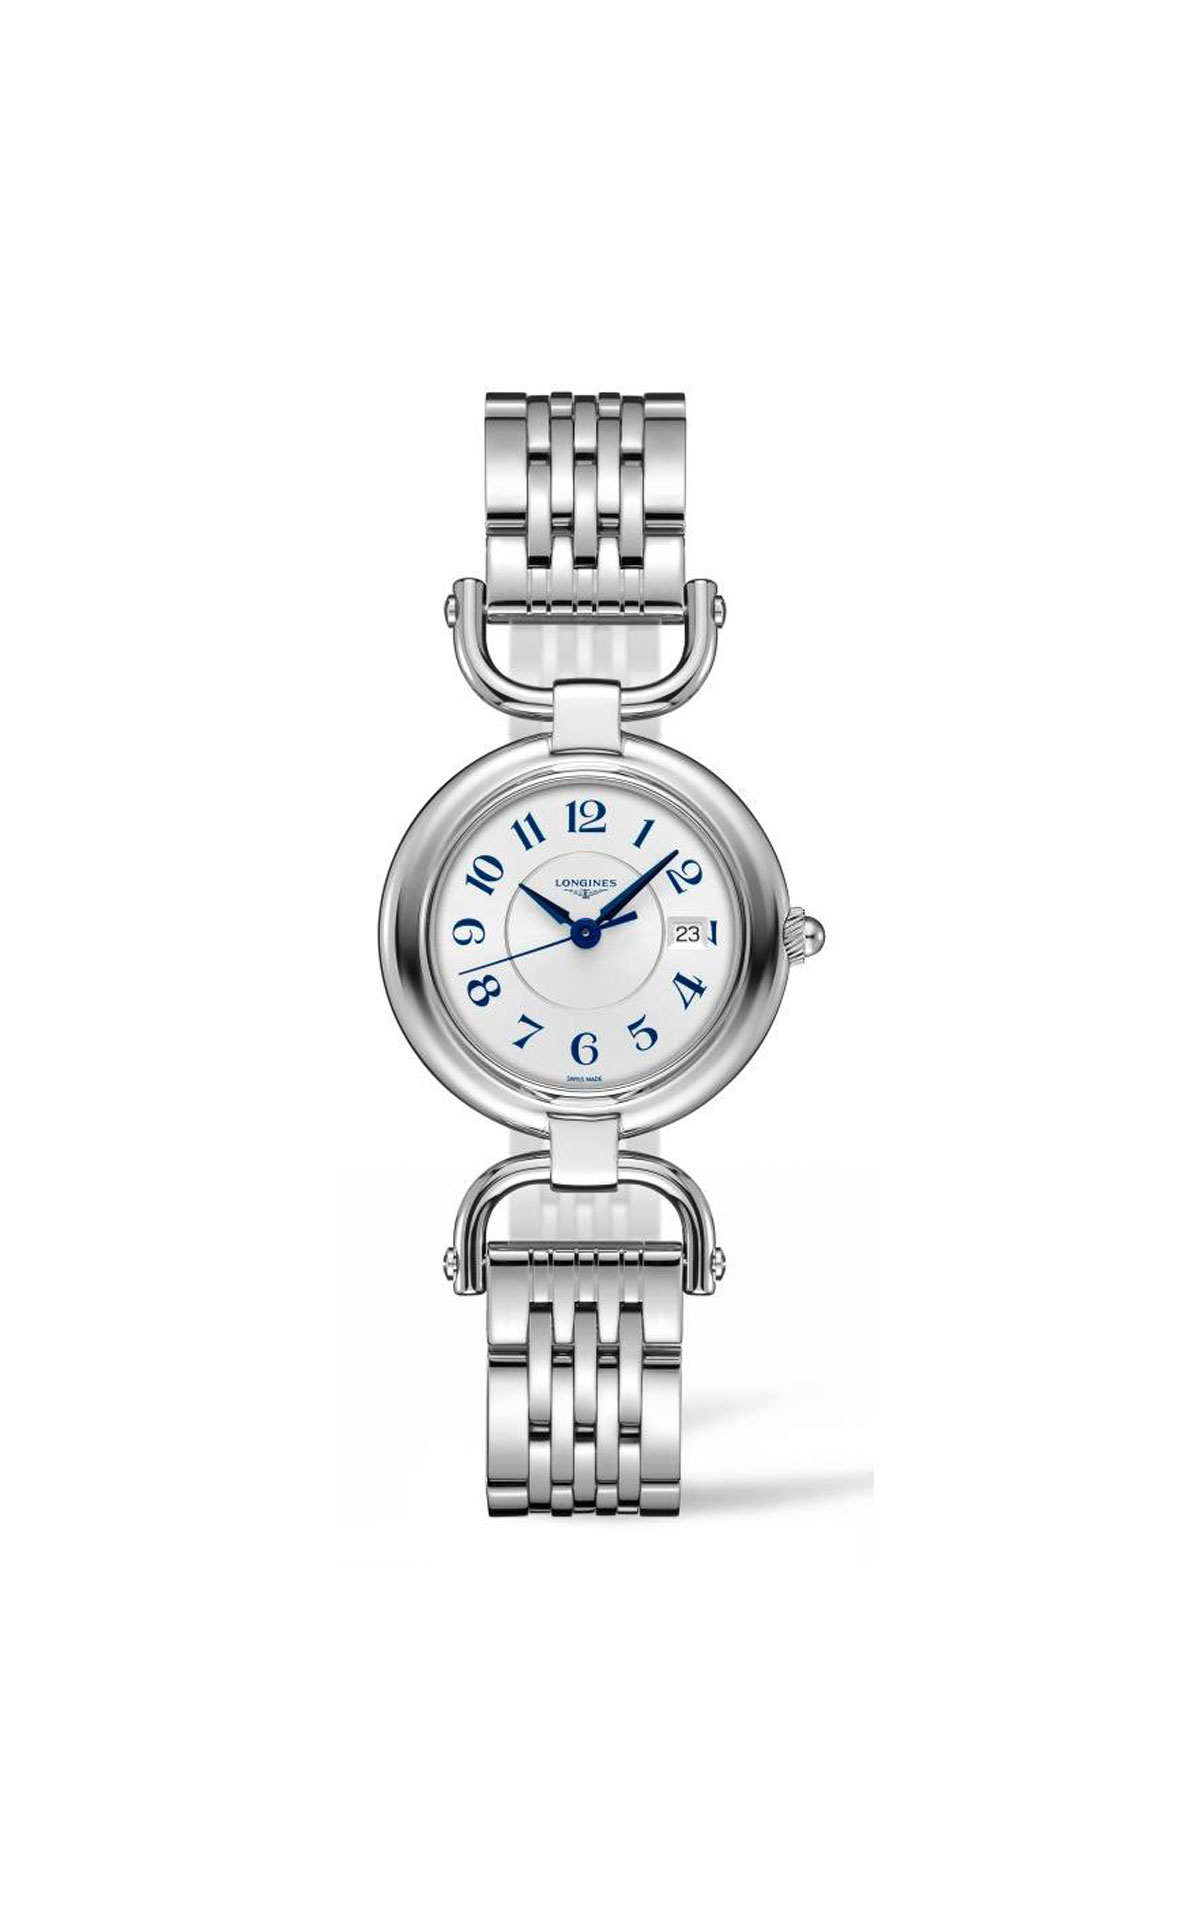 Longines L61314736 from Bicester Village